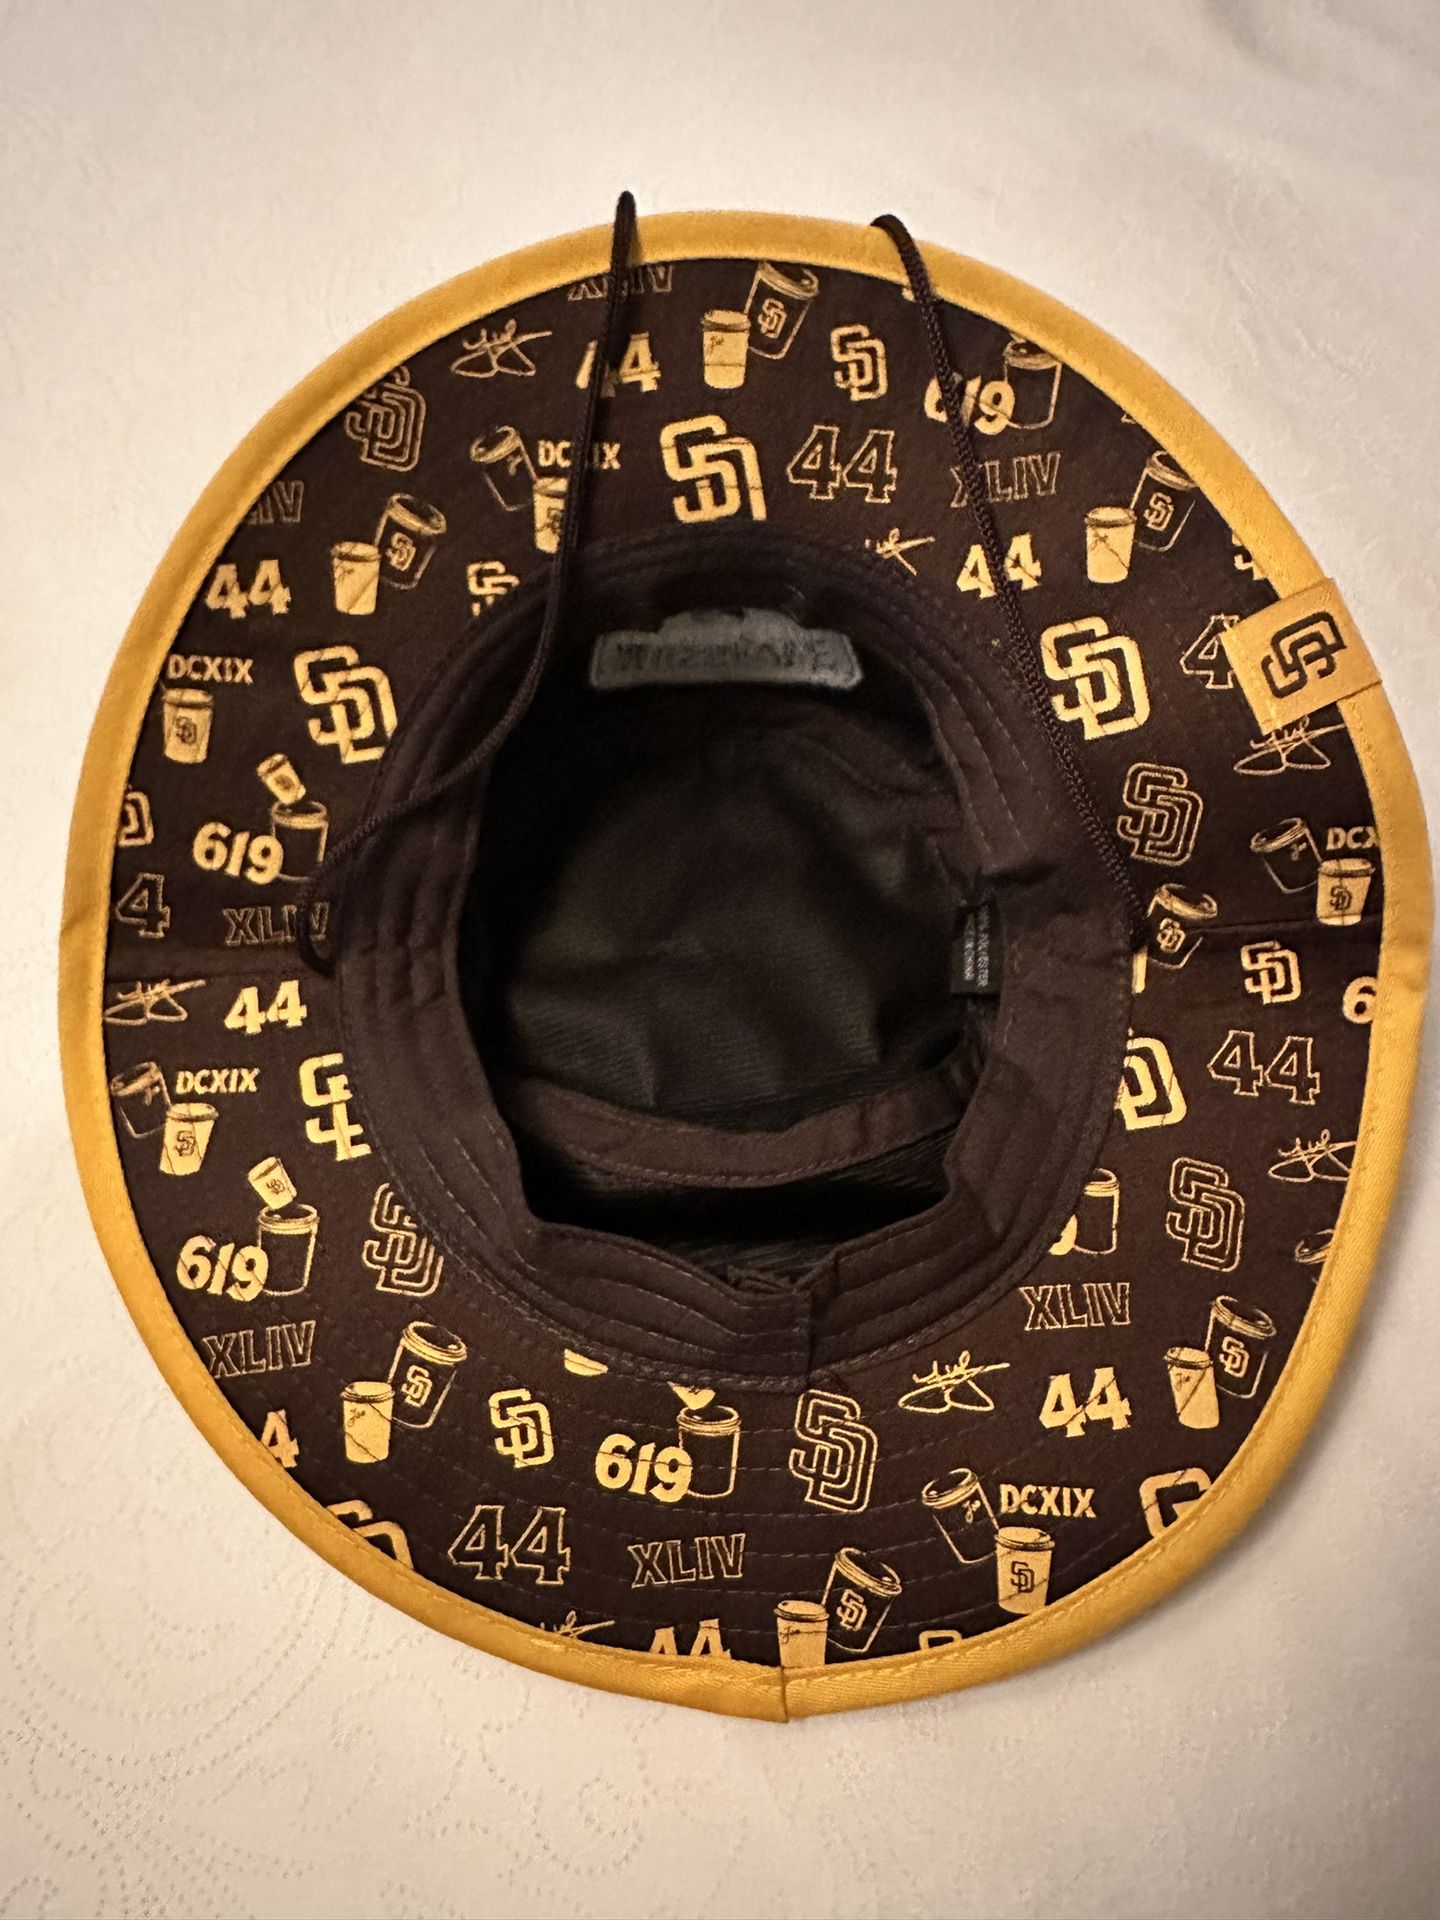 San Diego Padres on X: “These bucket hats are sick.” - @itsFatherJoe44,  probably Don't forget single-game tickets go on sale on Tuesday, February 7  at 10am PT:   / X